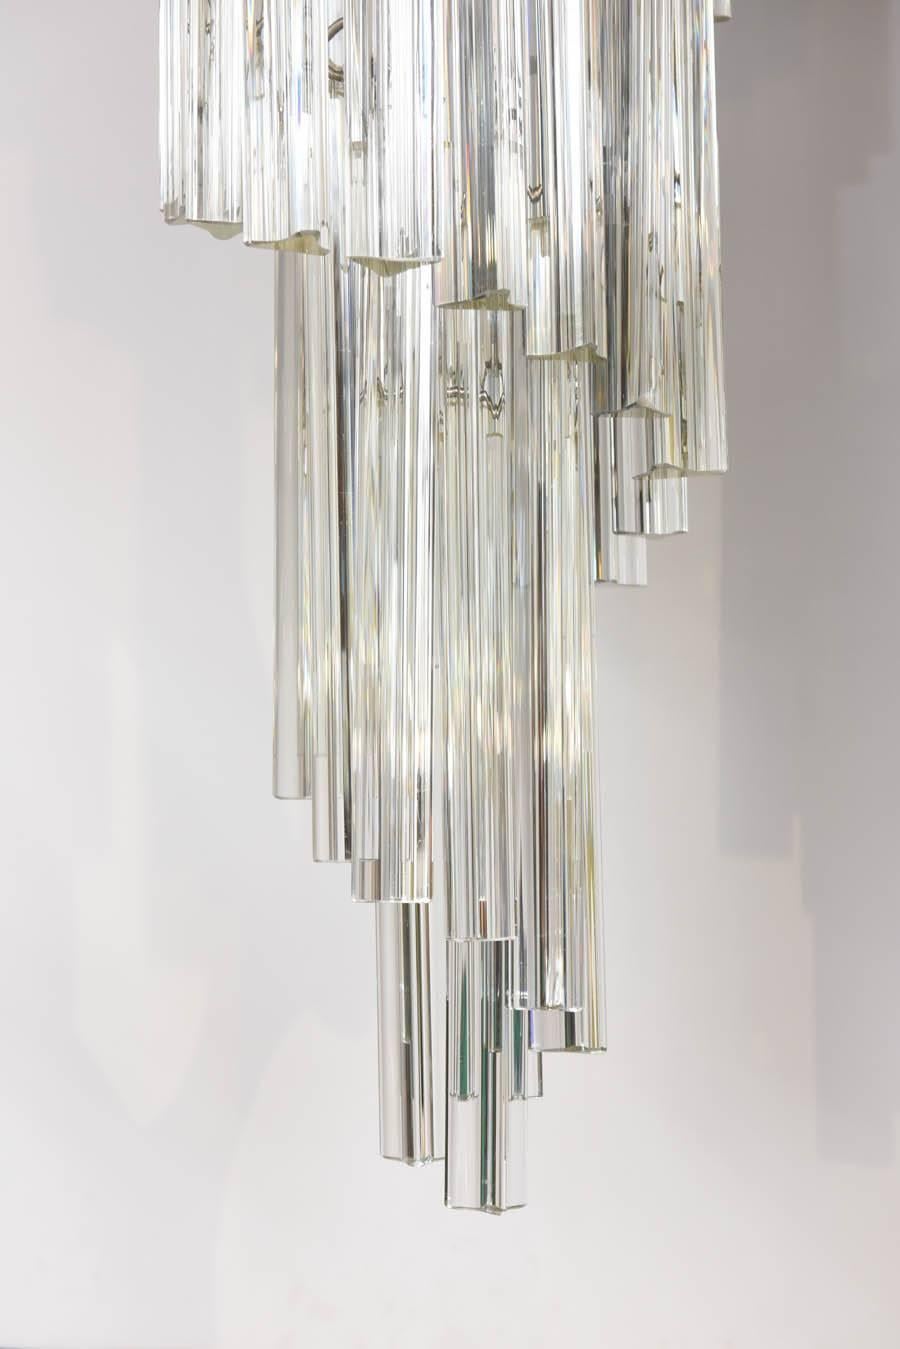 Real crystal rods make this wonderful and shiny chandelier sparkle.